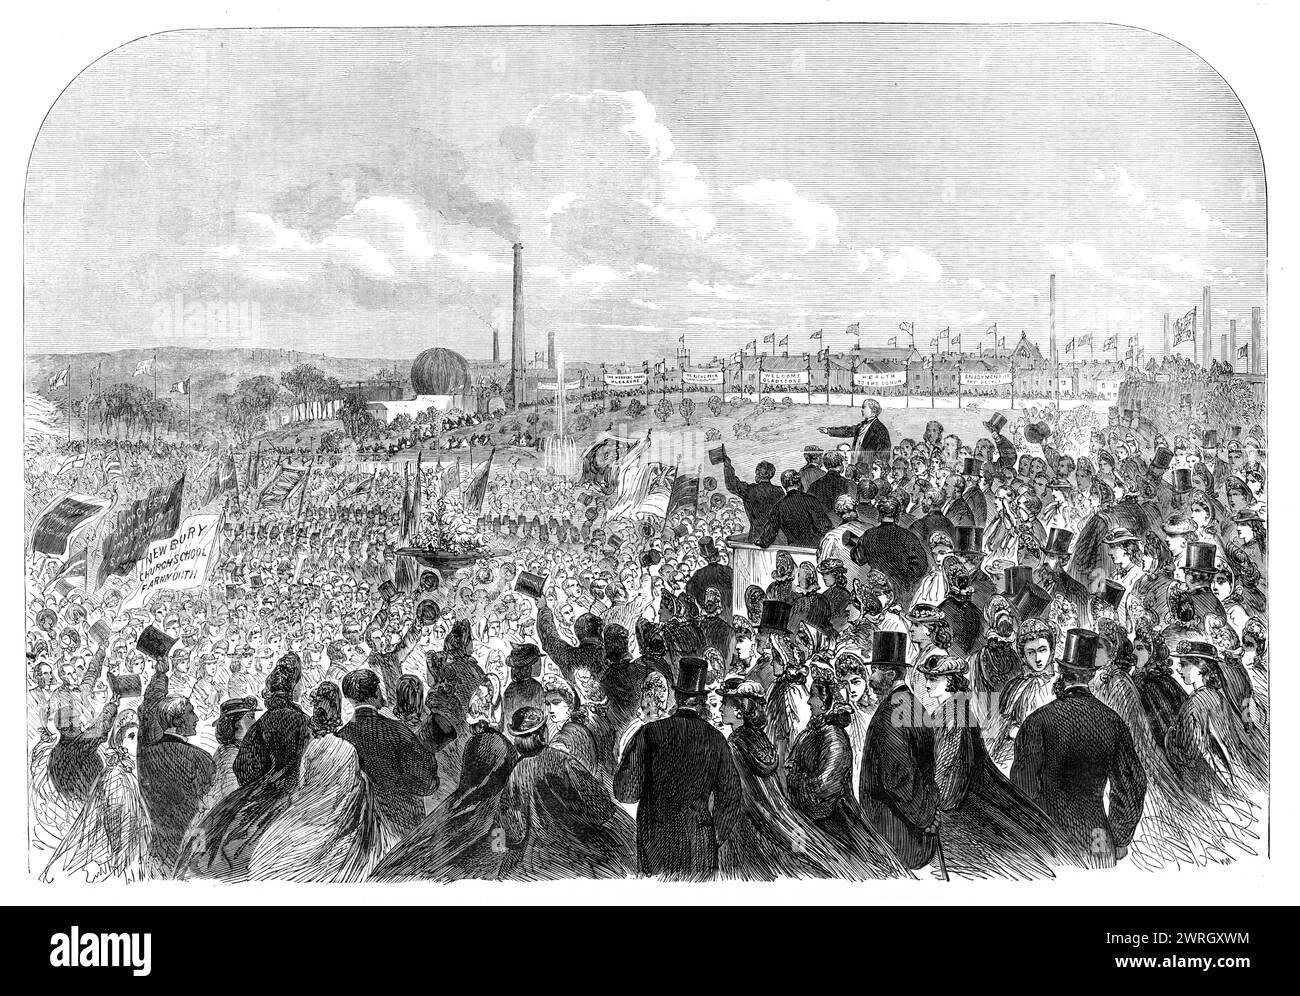 The opening of the People's Park, Farnworth, near Bolton, Lancashire, 1864. Chancellor of the Exchequer and future prime minister William Ewart Gladstone speaking to the crowd. The banners read: 'The Working Man's Pleasure; The Rich &amp; Poor [?]; Welcome Gladstone; Health to the Donor; Enjoyment of the People'. Farnworth Park was given to the people of Farnworth to provide a welcome rest from the daily drudge of the mills or mines. From &quot;Illustrated London News&quot;, 1864. Stock Photo